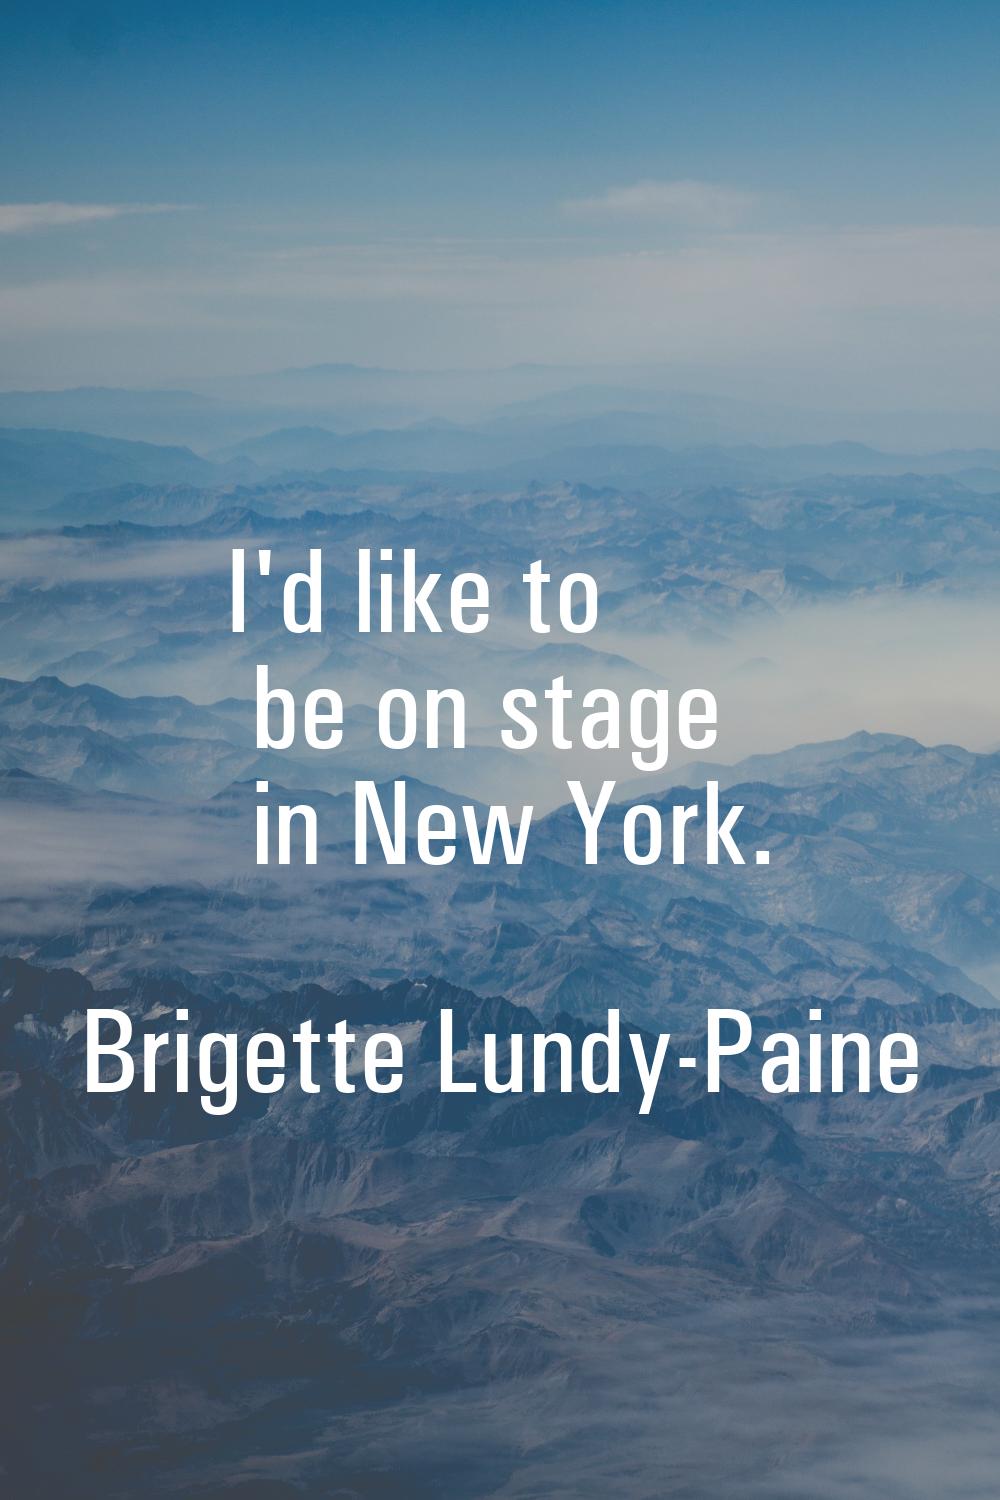 I'd like to be on stage in New York.